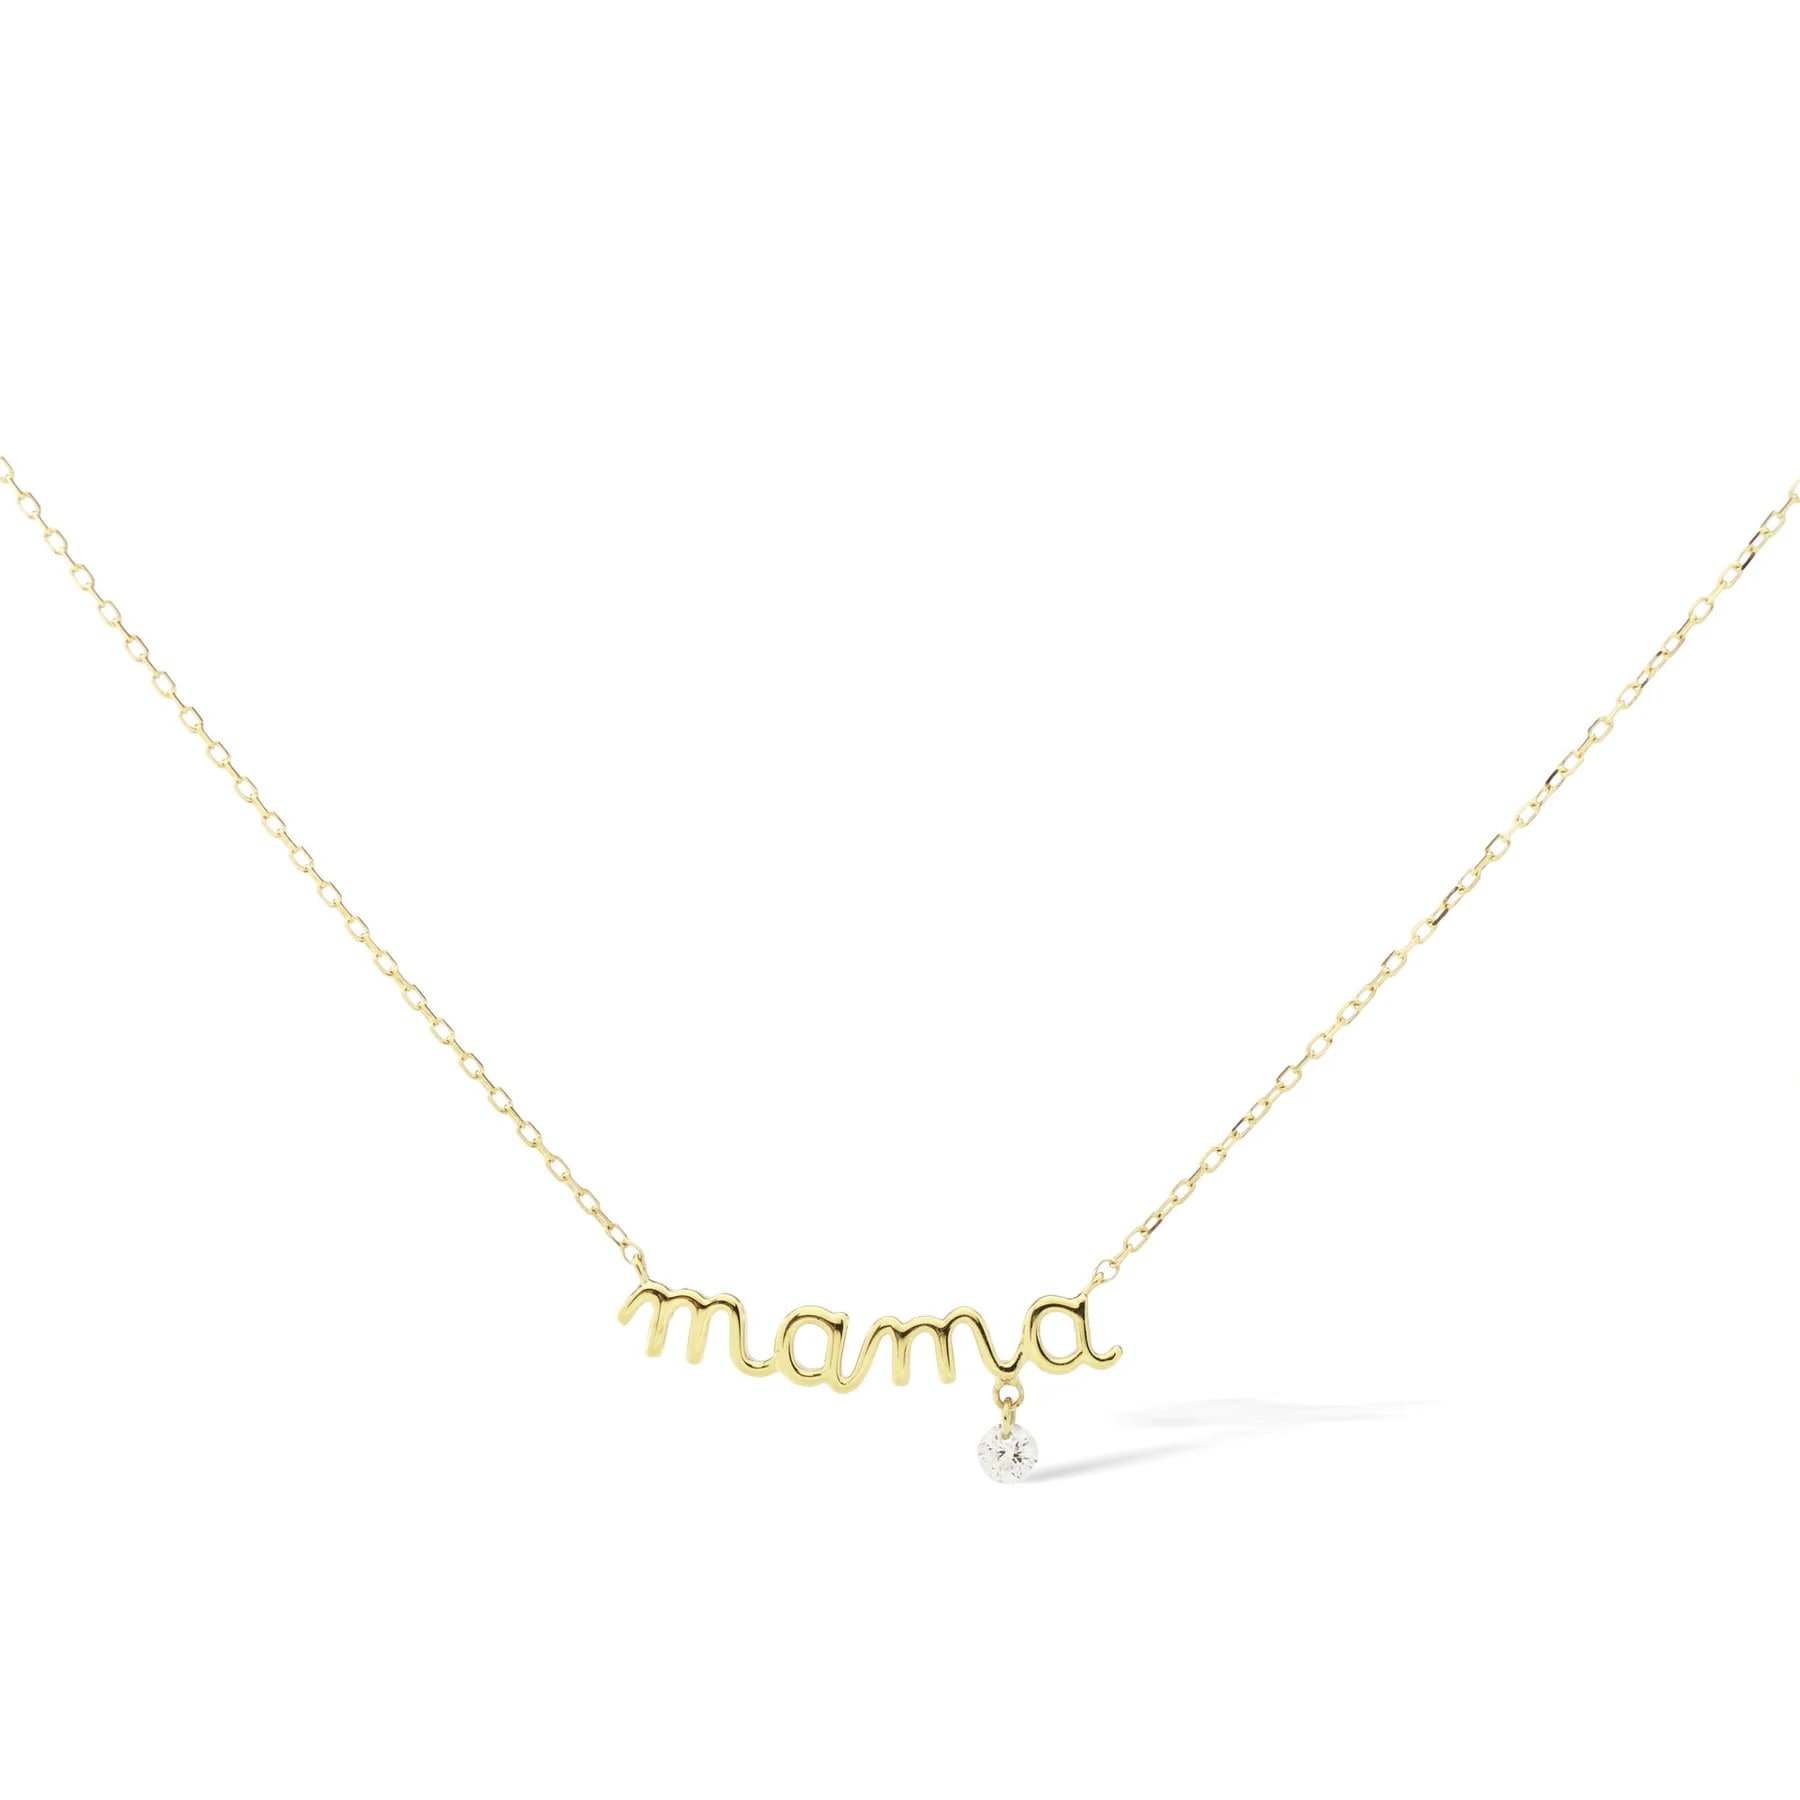 Dainty Mama Necklace. Mom Necklace Layered Necklace Birthday - Etsy | Mom  necklace, Mama necklace, Gold filled jewelry